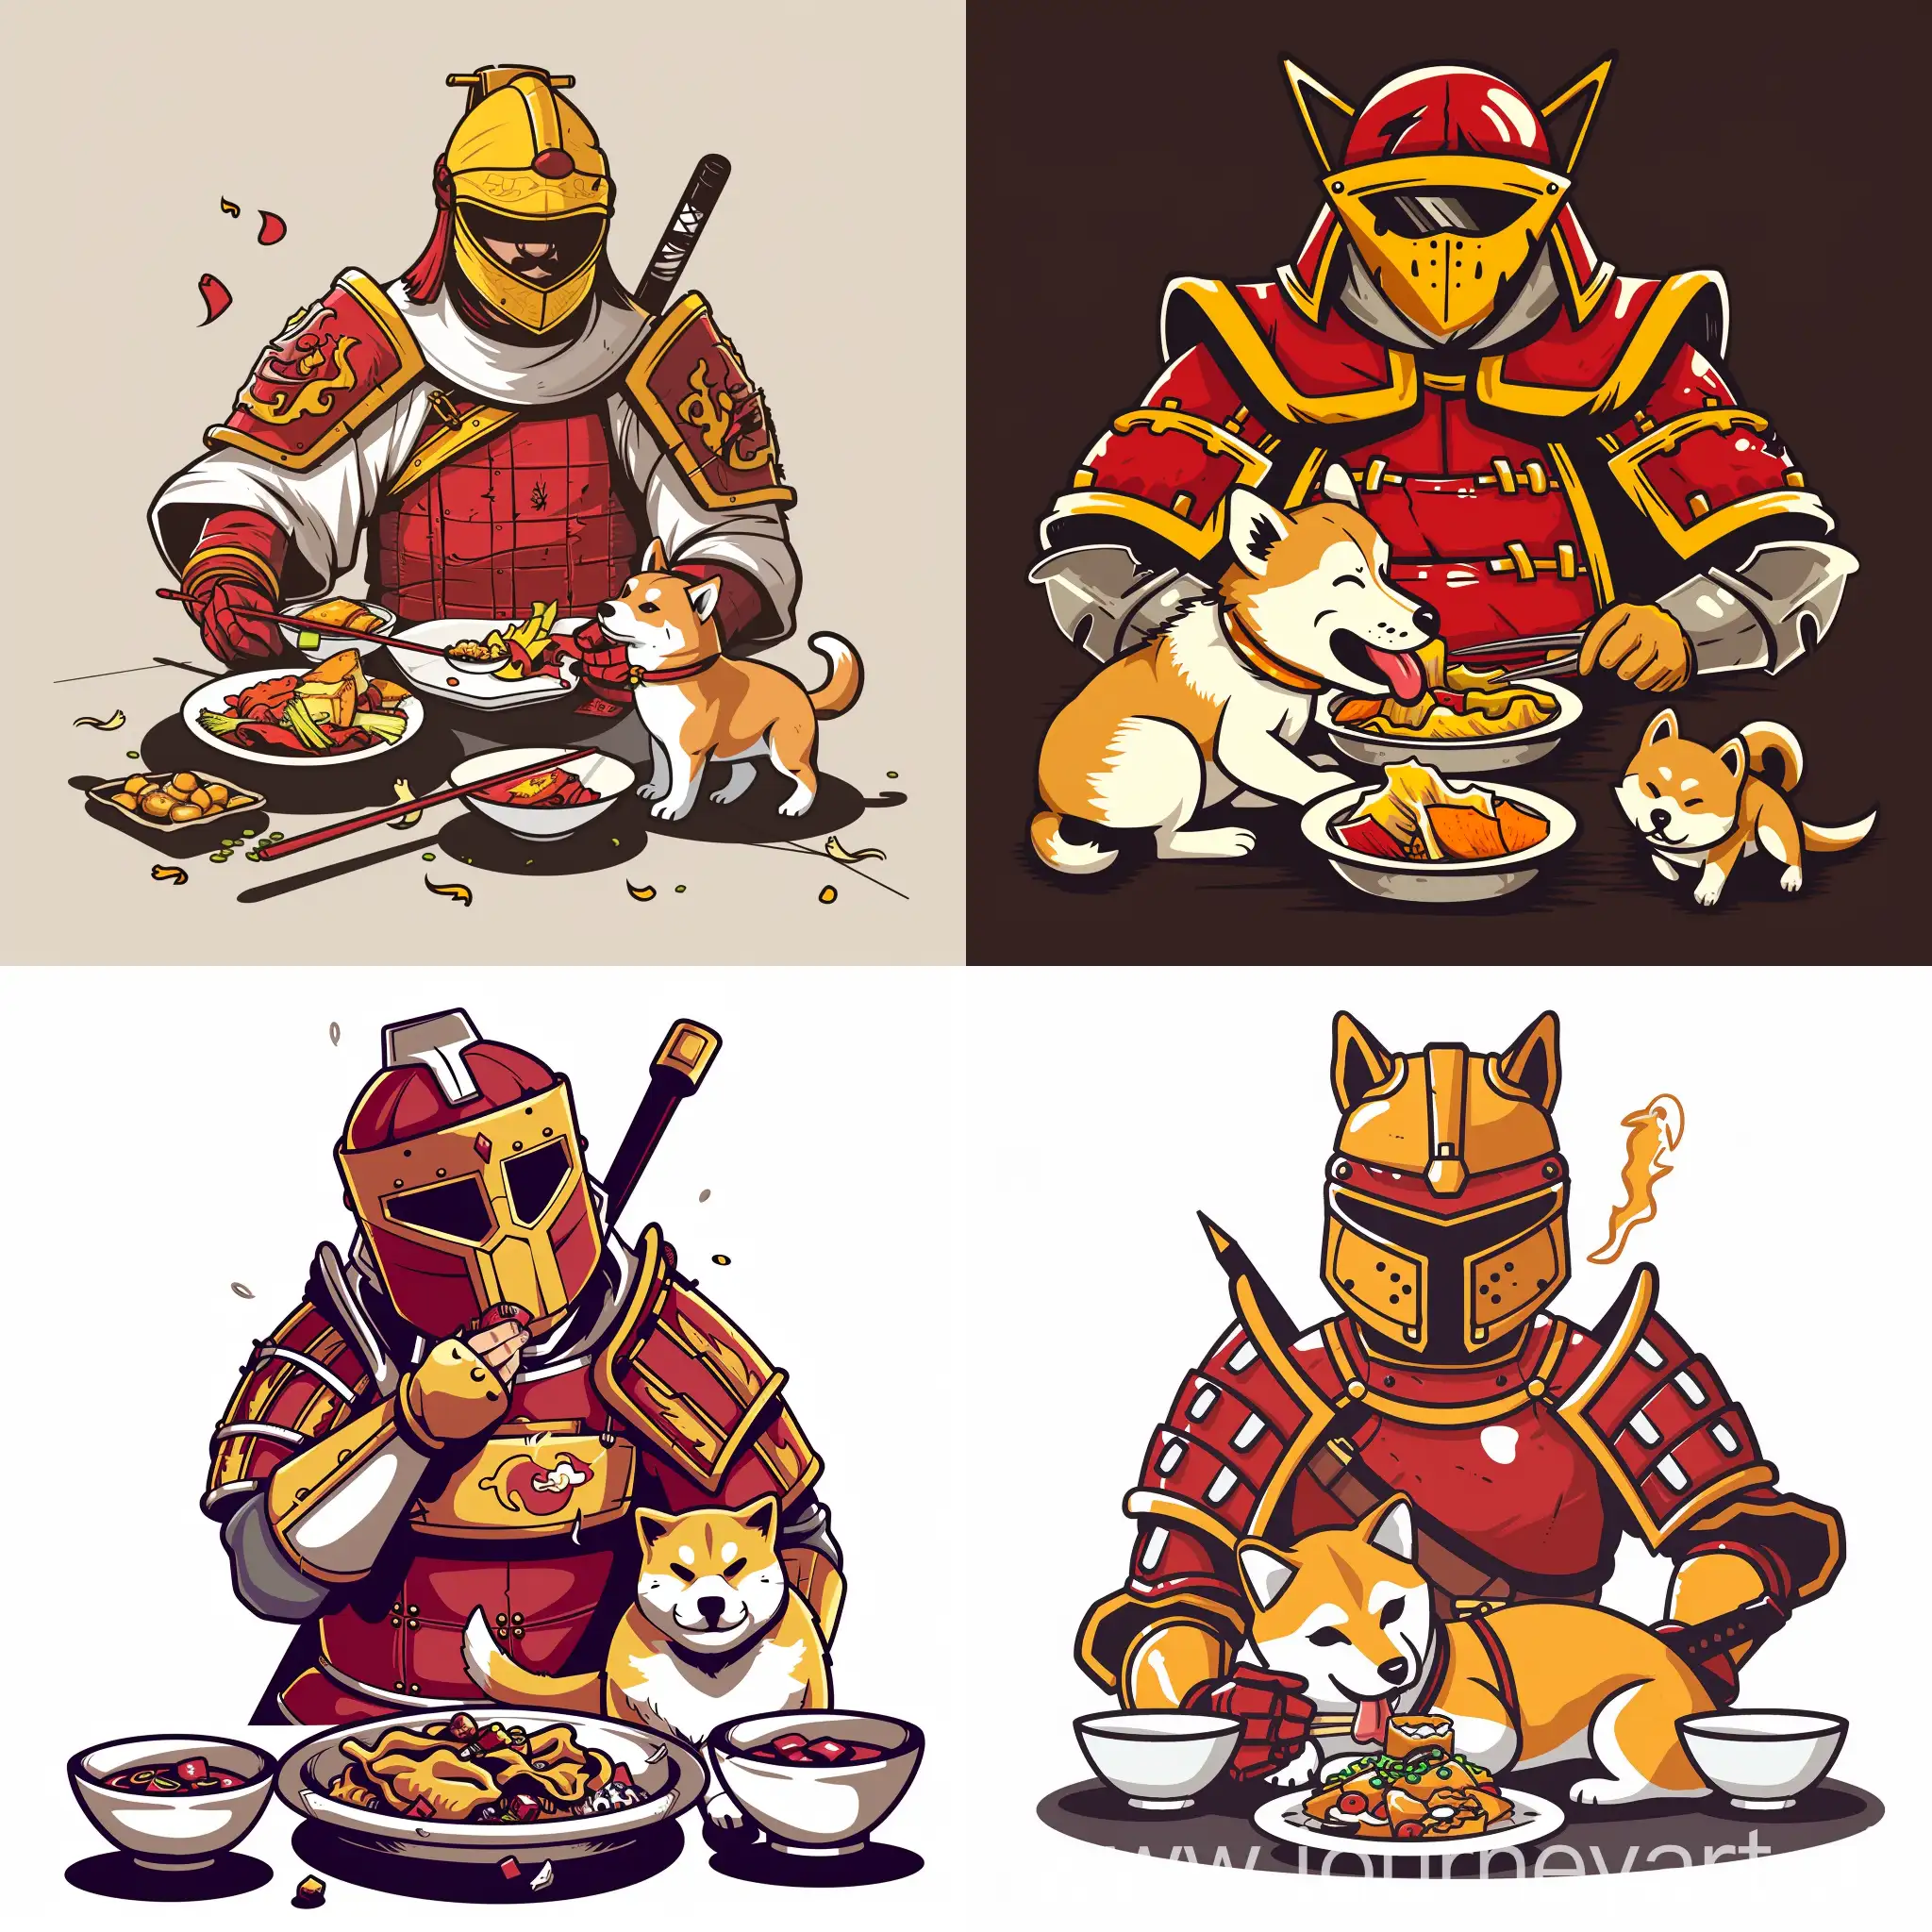 Cartoon. Colours: deep crimson, white and black. Medieval Chinese solider in red and yellow armour with visor helmet. He is eating chop suey and a shin inu dog.